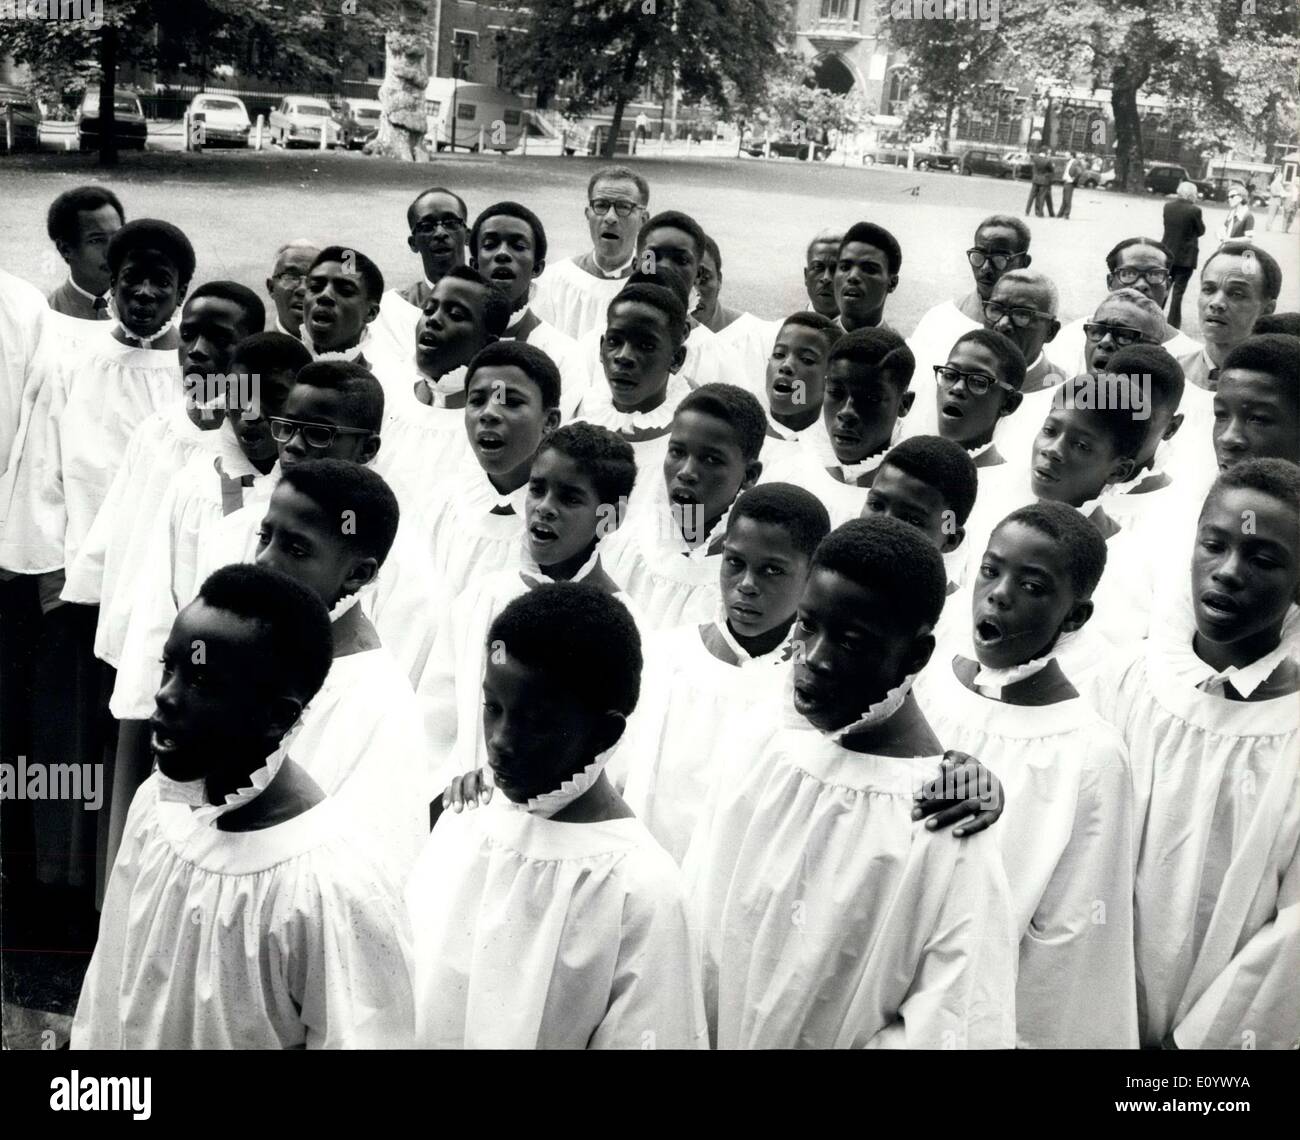 Aug. 20, 1971 - Barbados Choirboys To Sing At Westminster Abbey: Photo shows Choristers of St. Michael's Cathedra, Bridgetown, Barbados, pictured yesterday outside Westminster Abbey, London, where they will be singing until the Abbey's choir returns from holiday on Sept. 5. Stock Photo